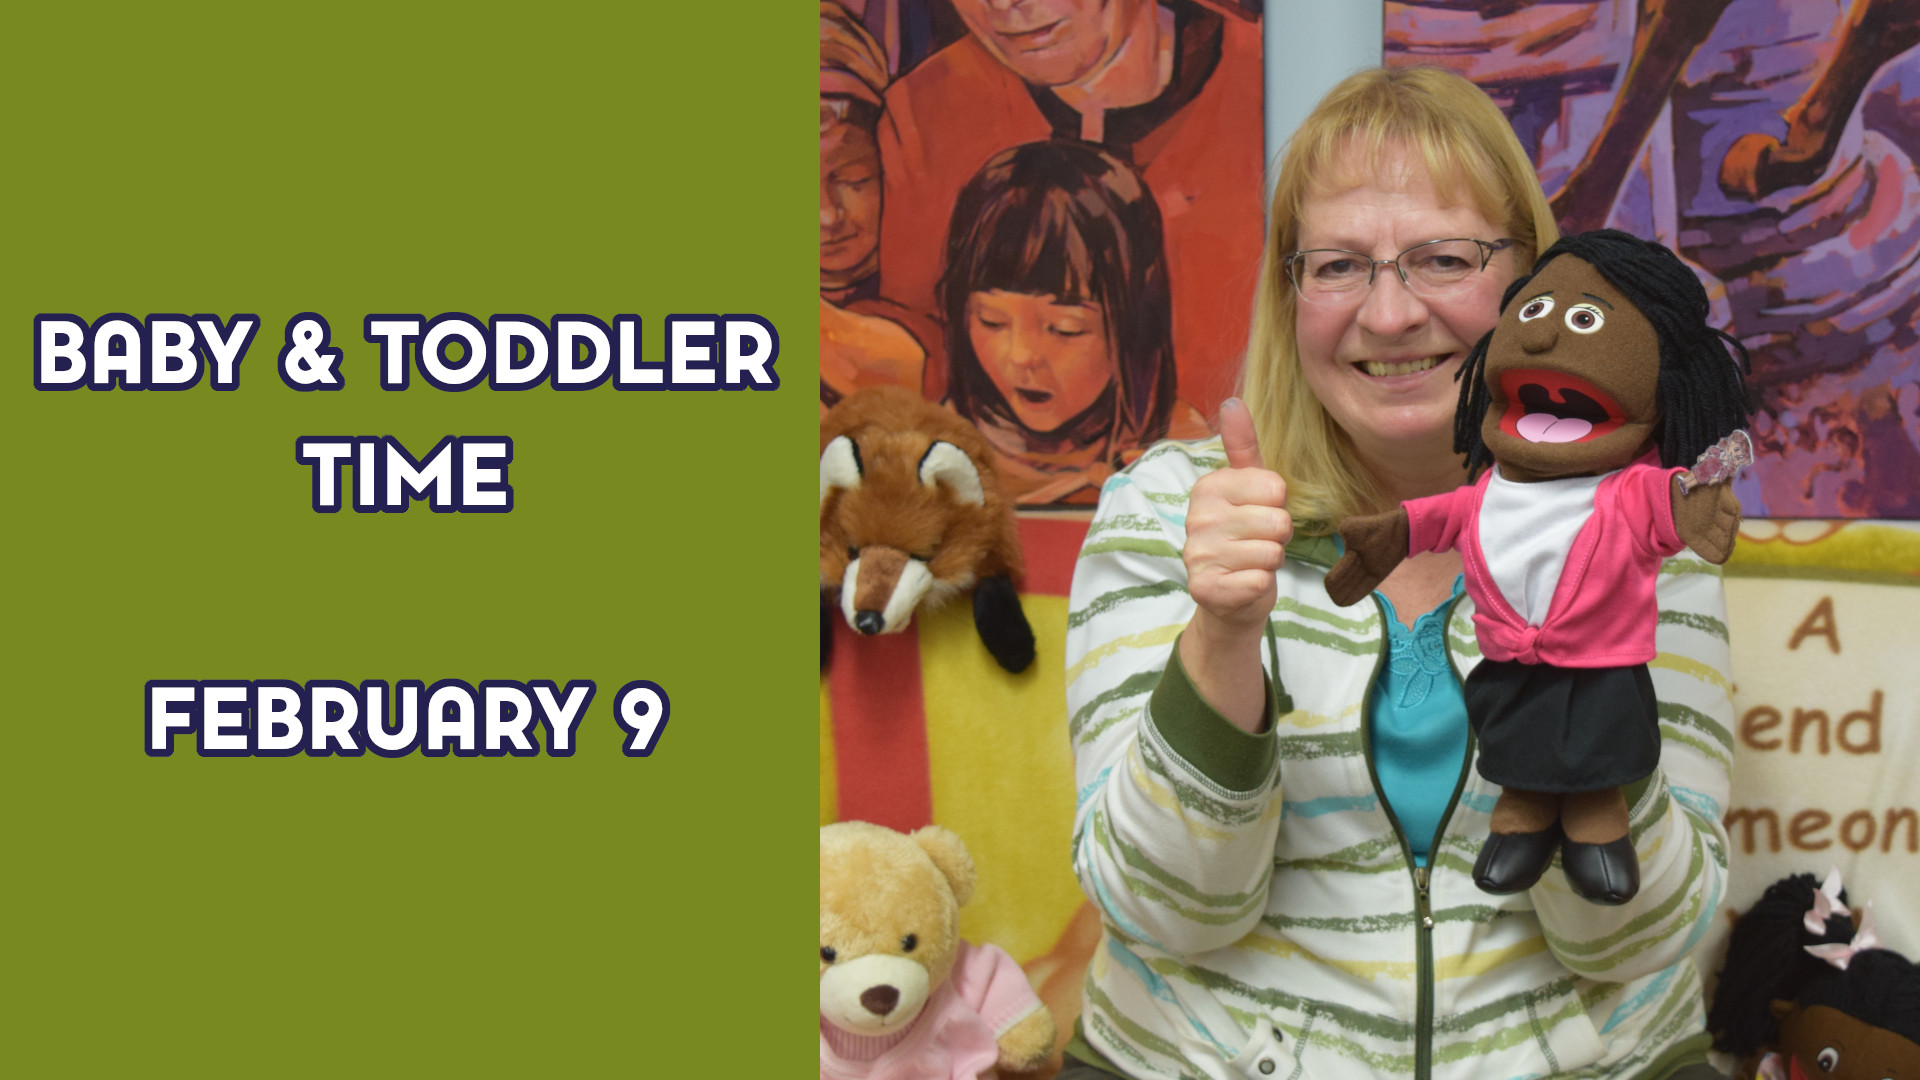 A woman holds puppets next to the text "Baby and Toddler Time February 9"